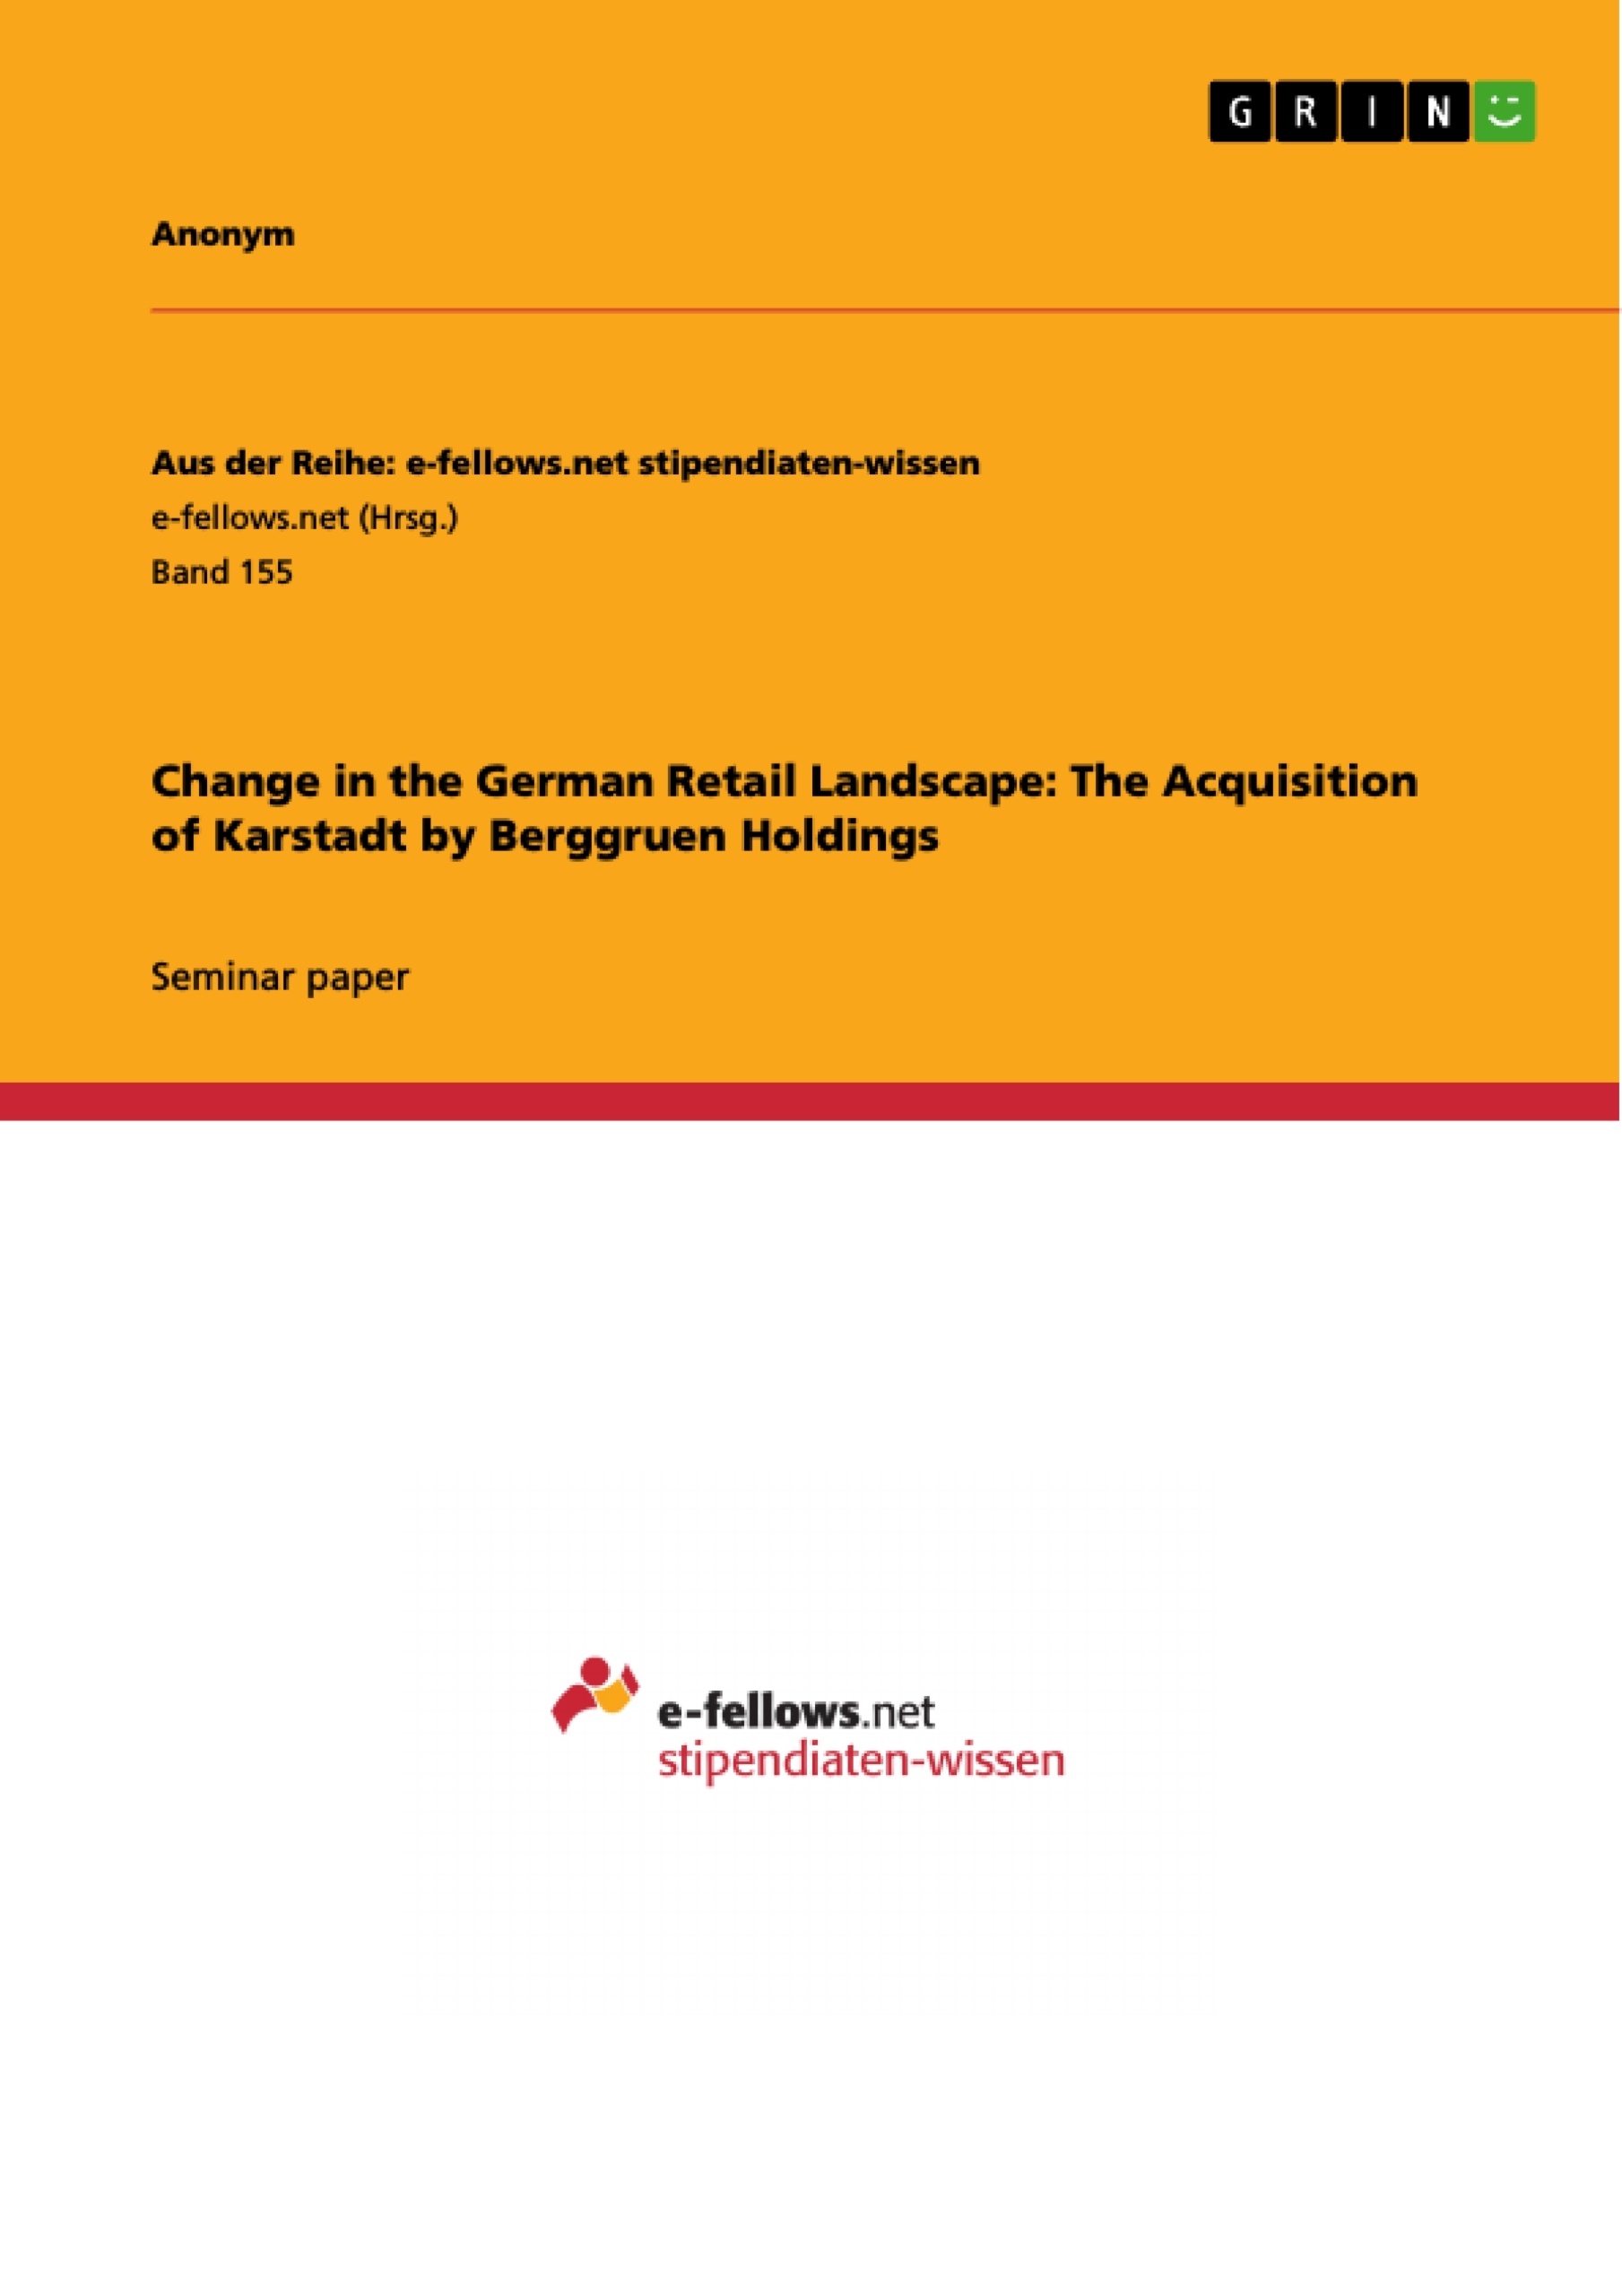 Título: Change in the German Retail Landscape: The Acquisition of Karstadt by Berggruen Holdings